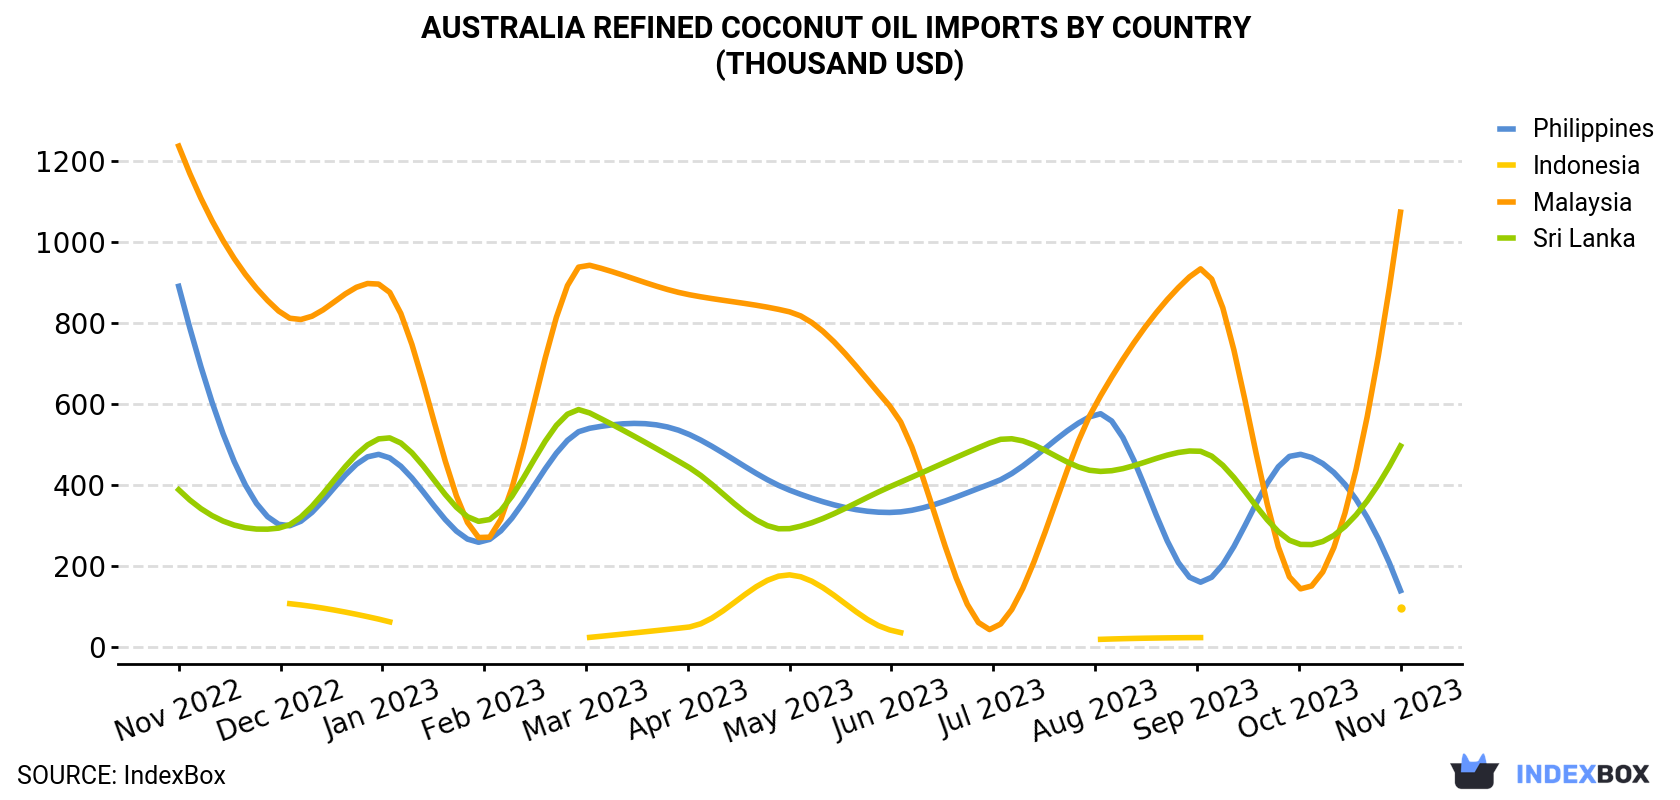 Australia Refined Coconut Oil Imports By Country (Thousand USD)